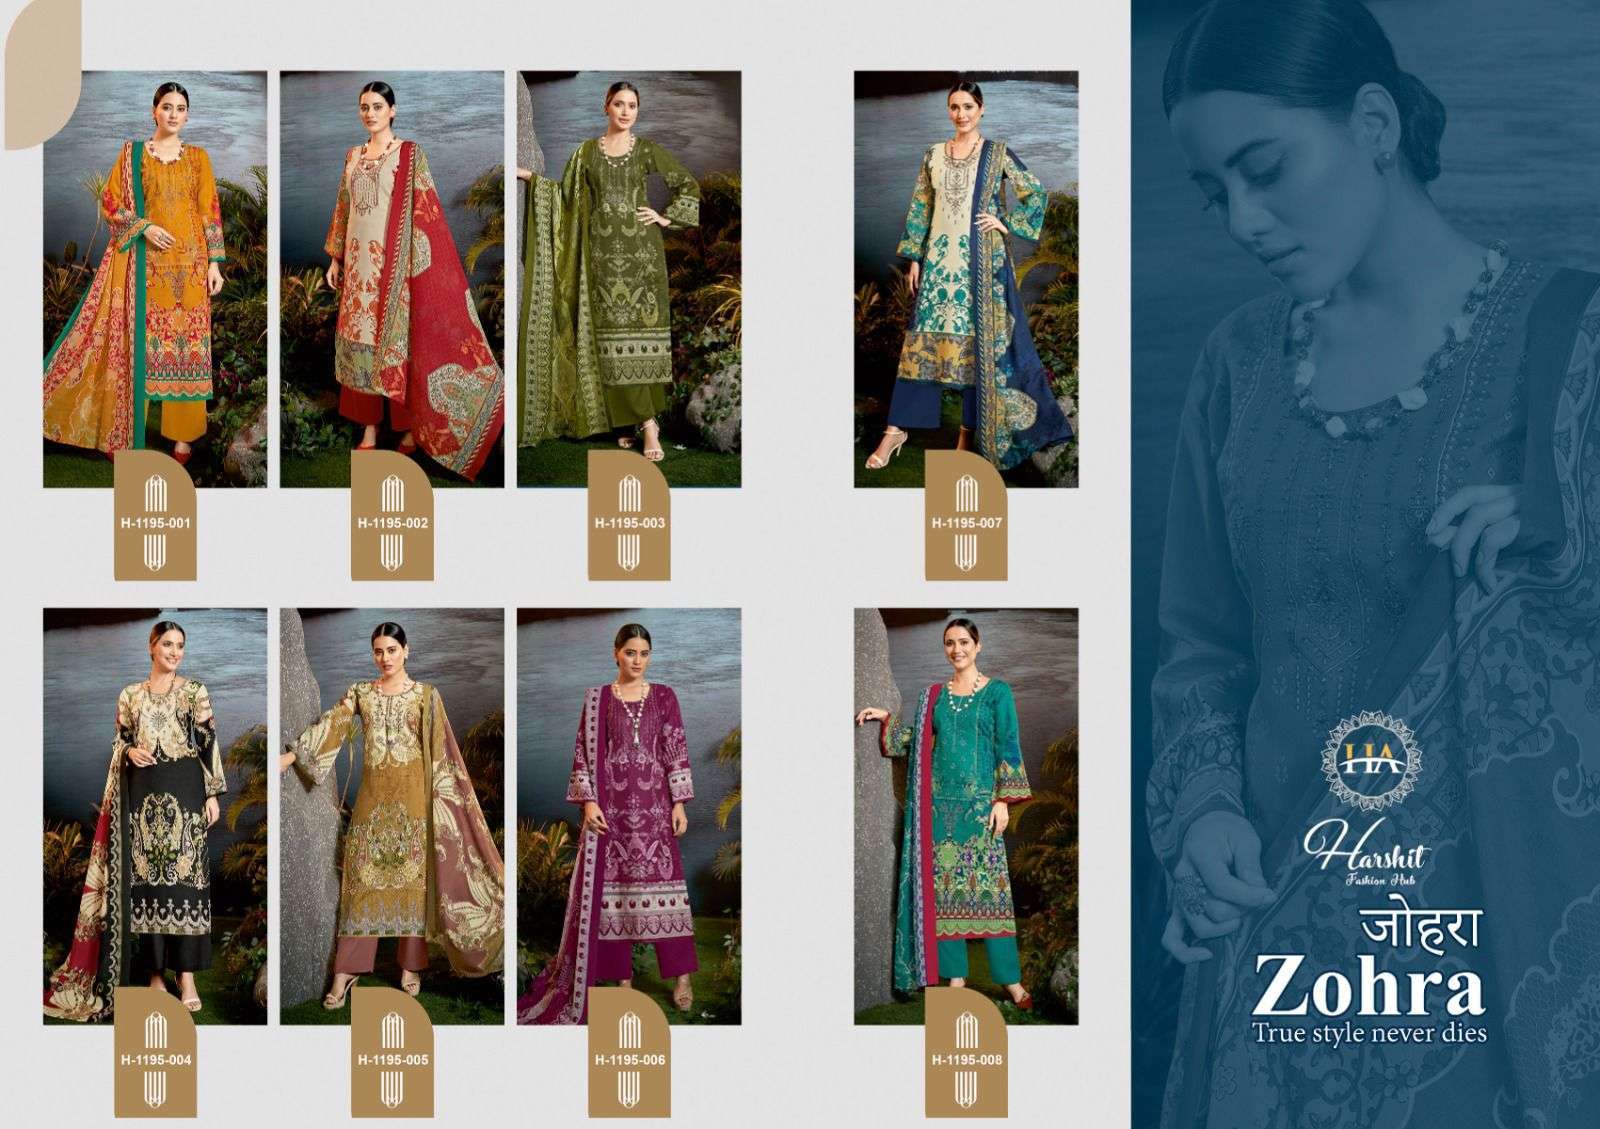 Zohra By Harshit Fashion Hub 1195-001 To 1195-008 Series Beautiful Suits Colorful Stylish Fancy Casual Wear Pure Cambric Cotton Print With Work Dresses At Wholesale Price